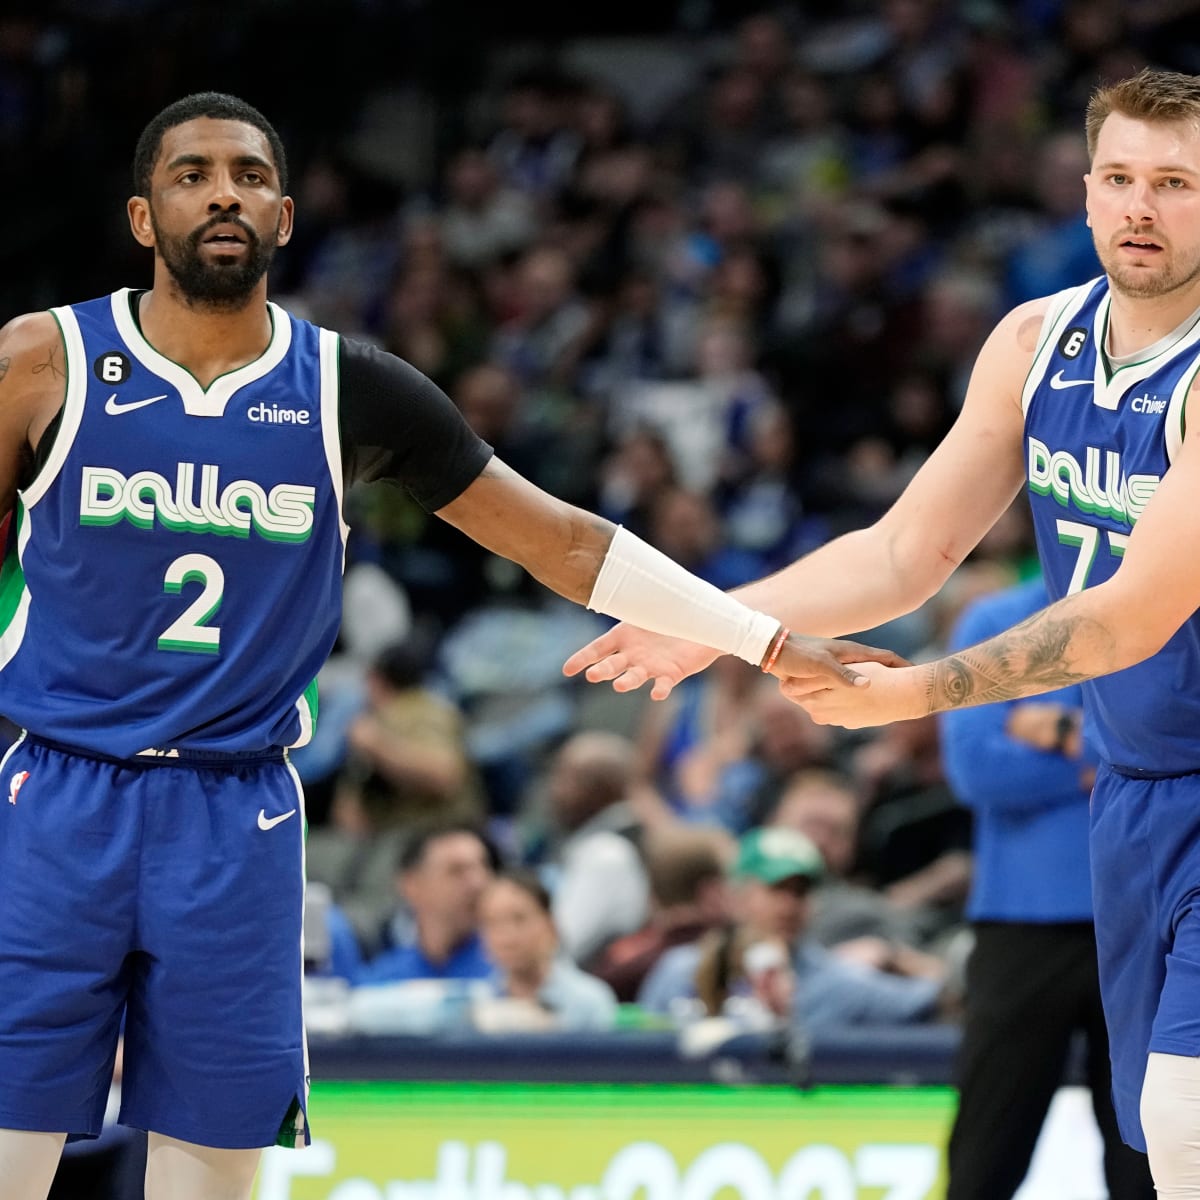 Kyrie Irving isn't to blame for Mavericks' mess. It's mistakes of the past  still holding them back